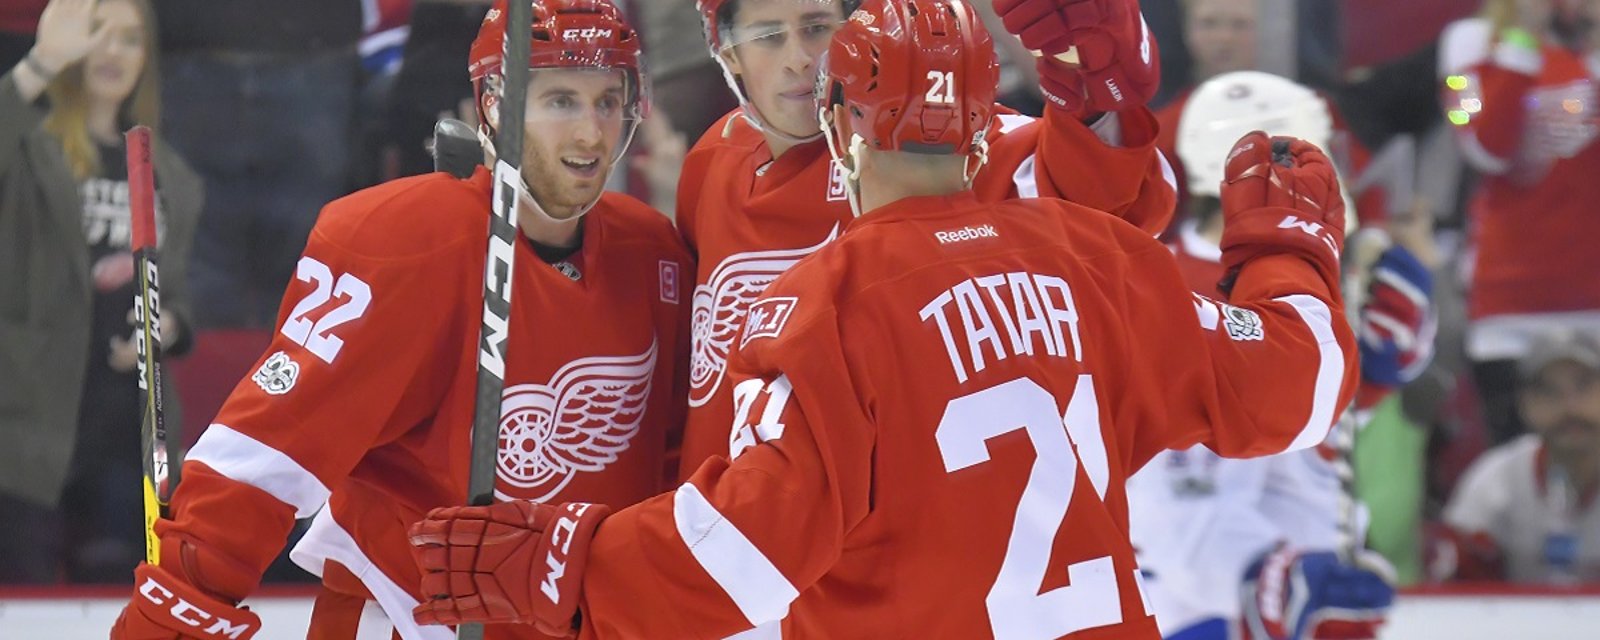 Red Wings forward among those who filed for arbitration today.